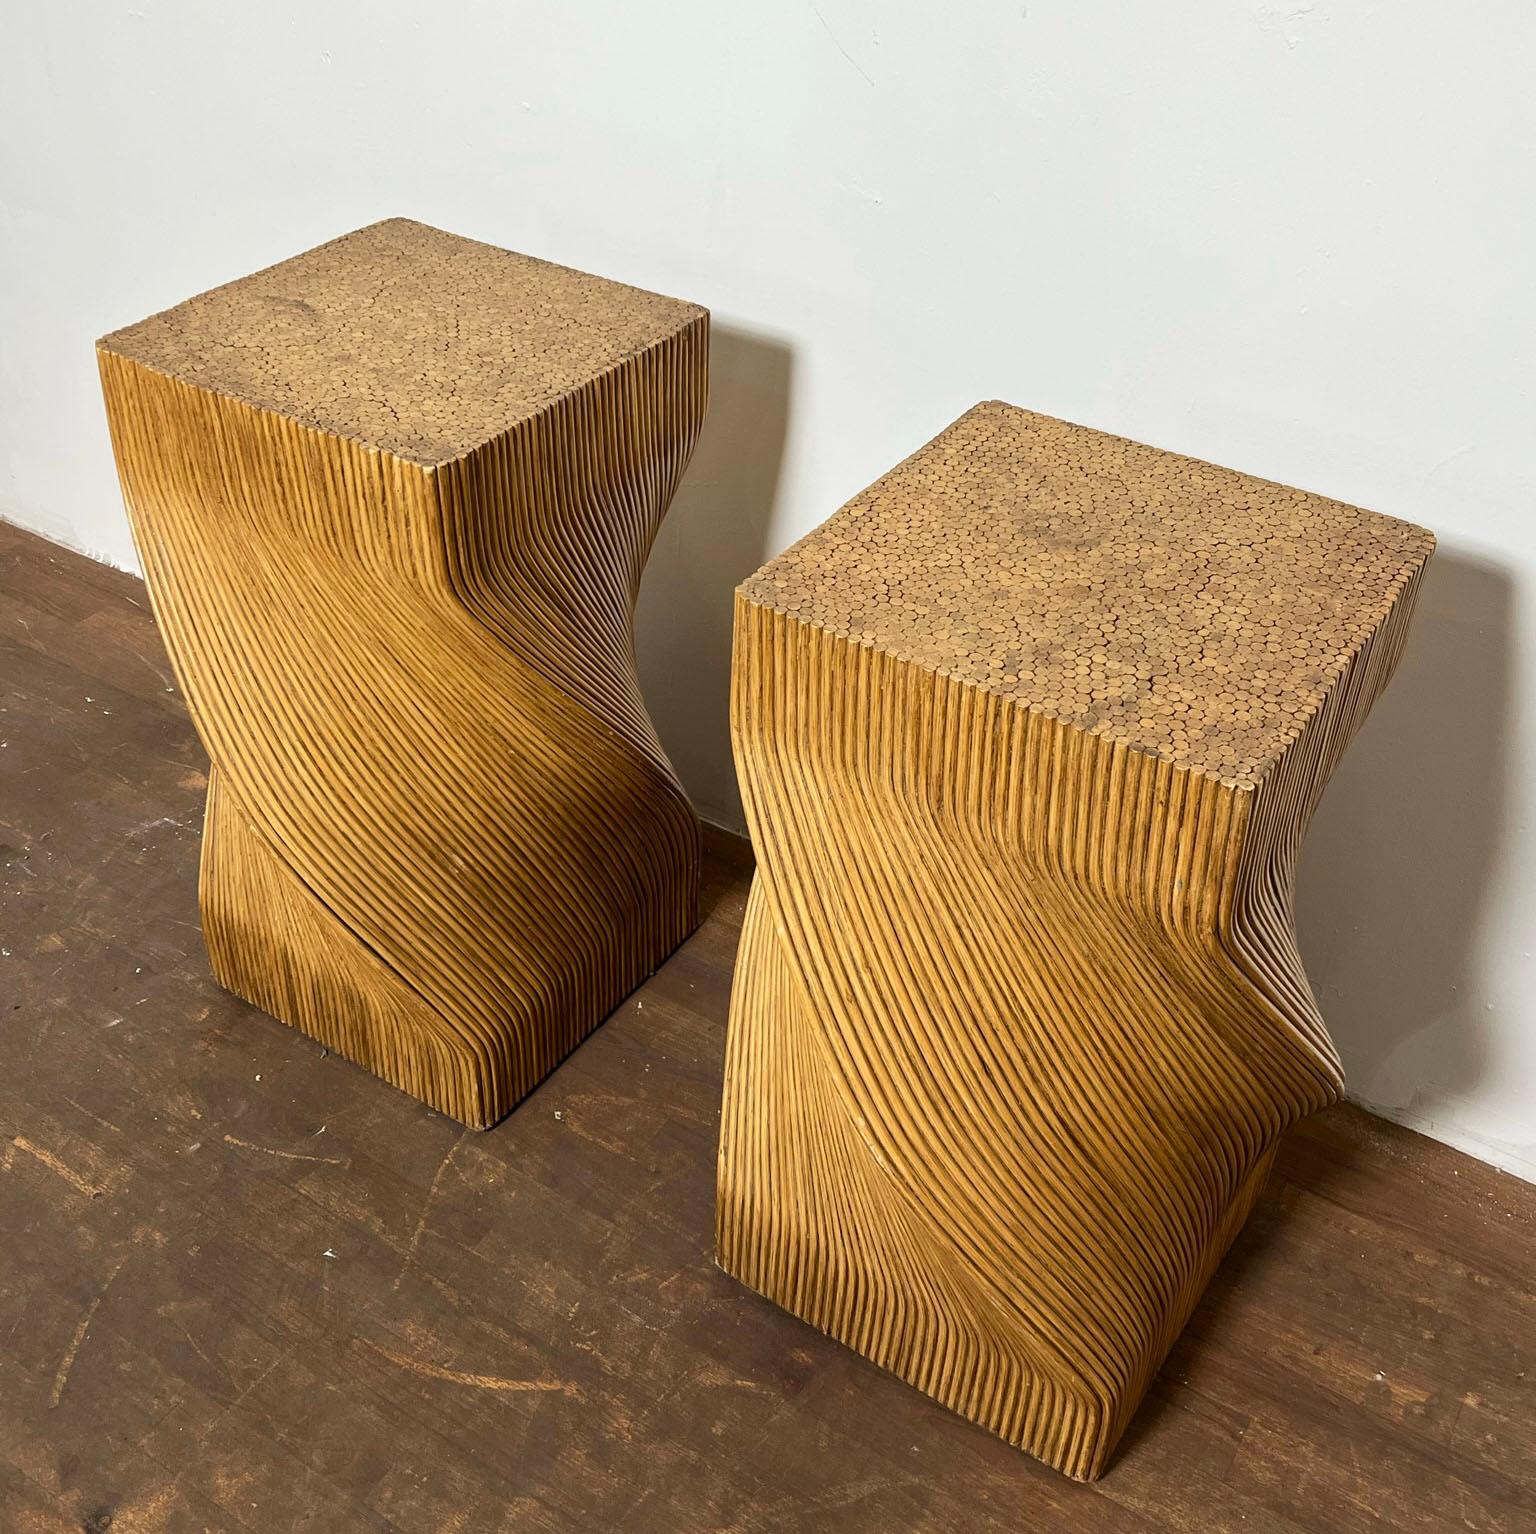 A pair of sculptural split reed lamp tables ca. 1970s. Can also serve as pedestals, either for sculpture, or together as a base for a glass top dining table. Both retain labels indicating these were handmade in the Philippines. Measure 20